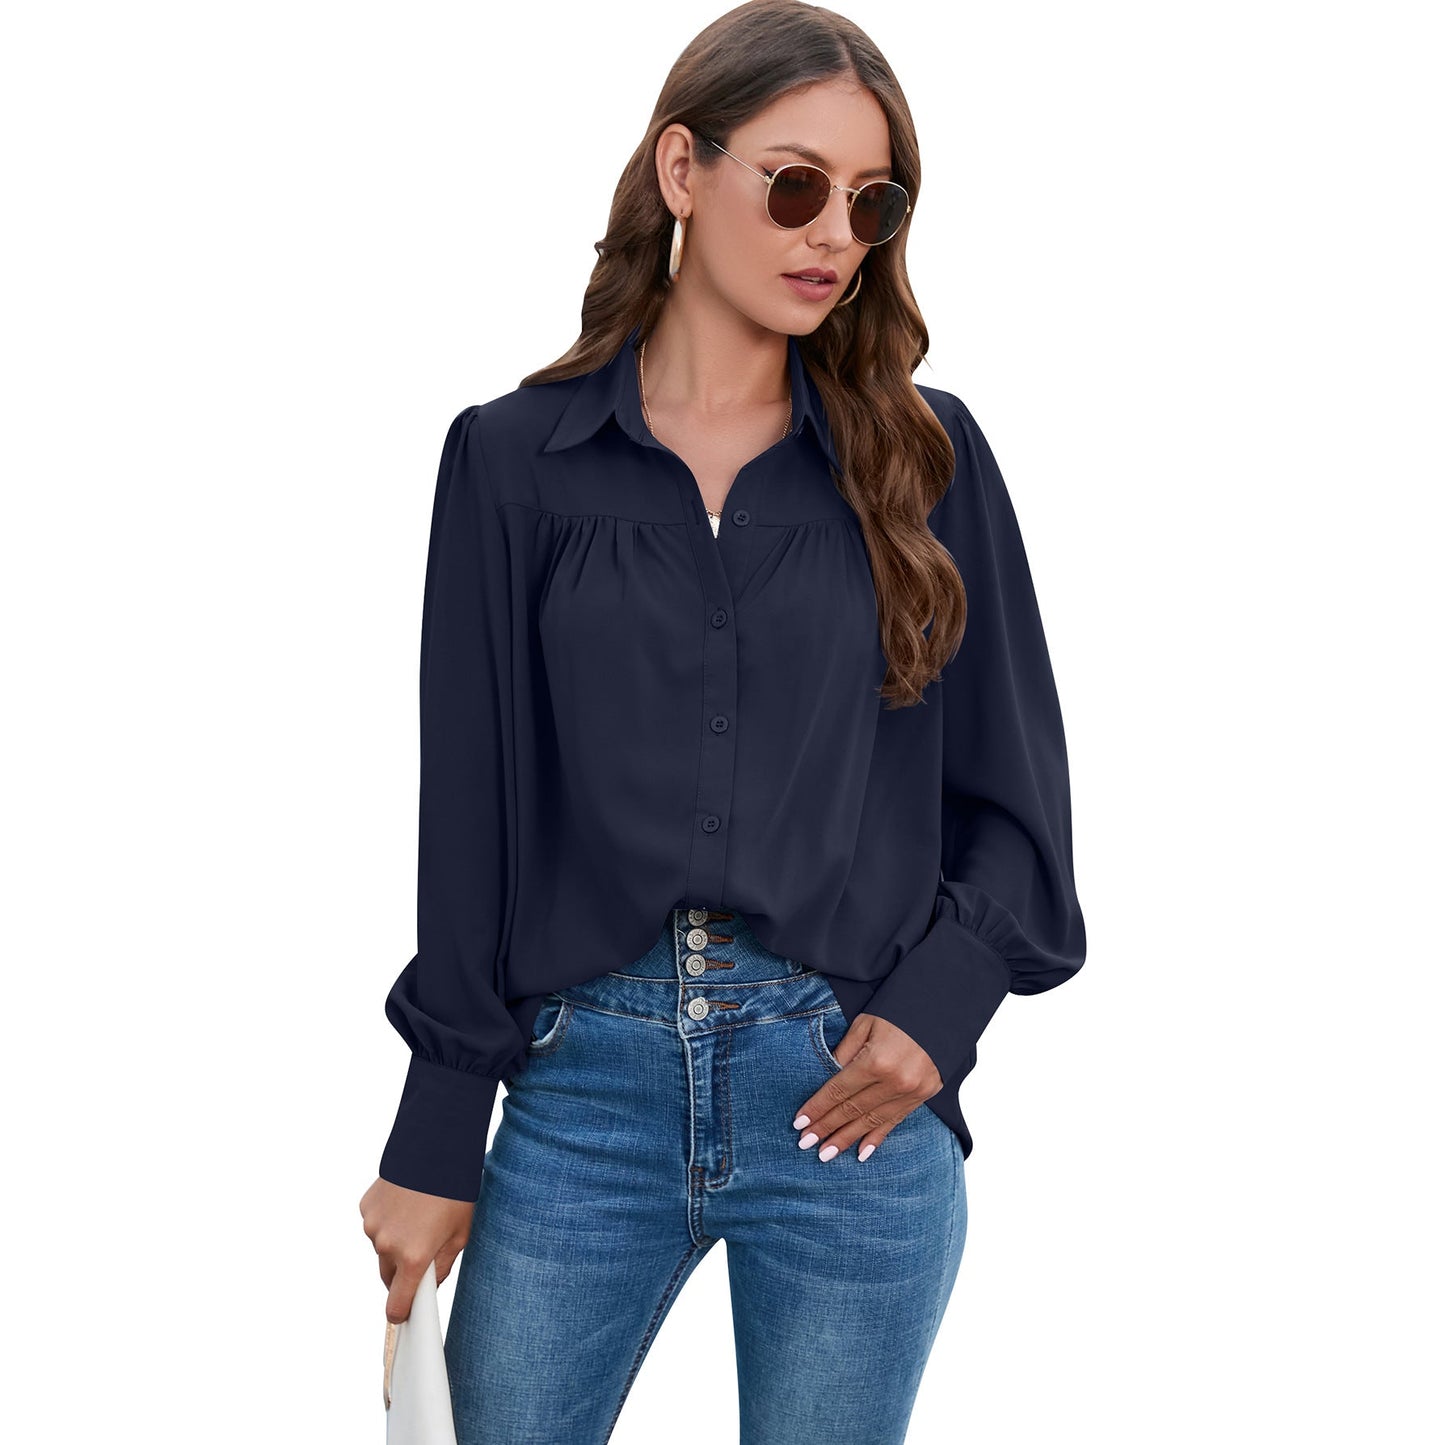 Casual Chiffon Long Sleeves Blouses for Women-Shirts & Tops-Navy Blue-S-Free Shipping at meselling99